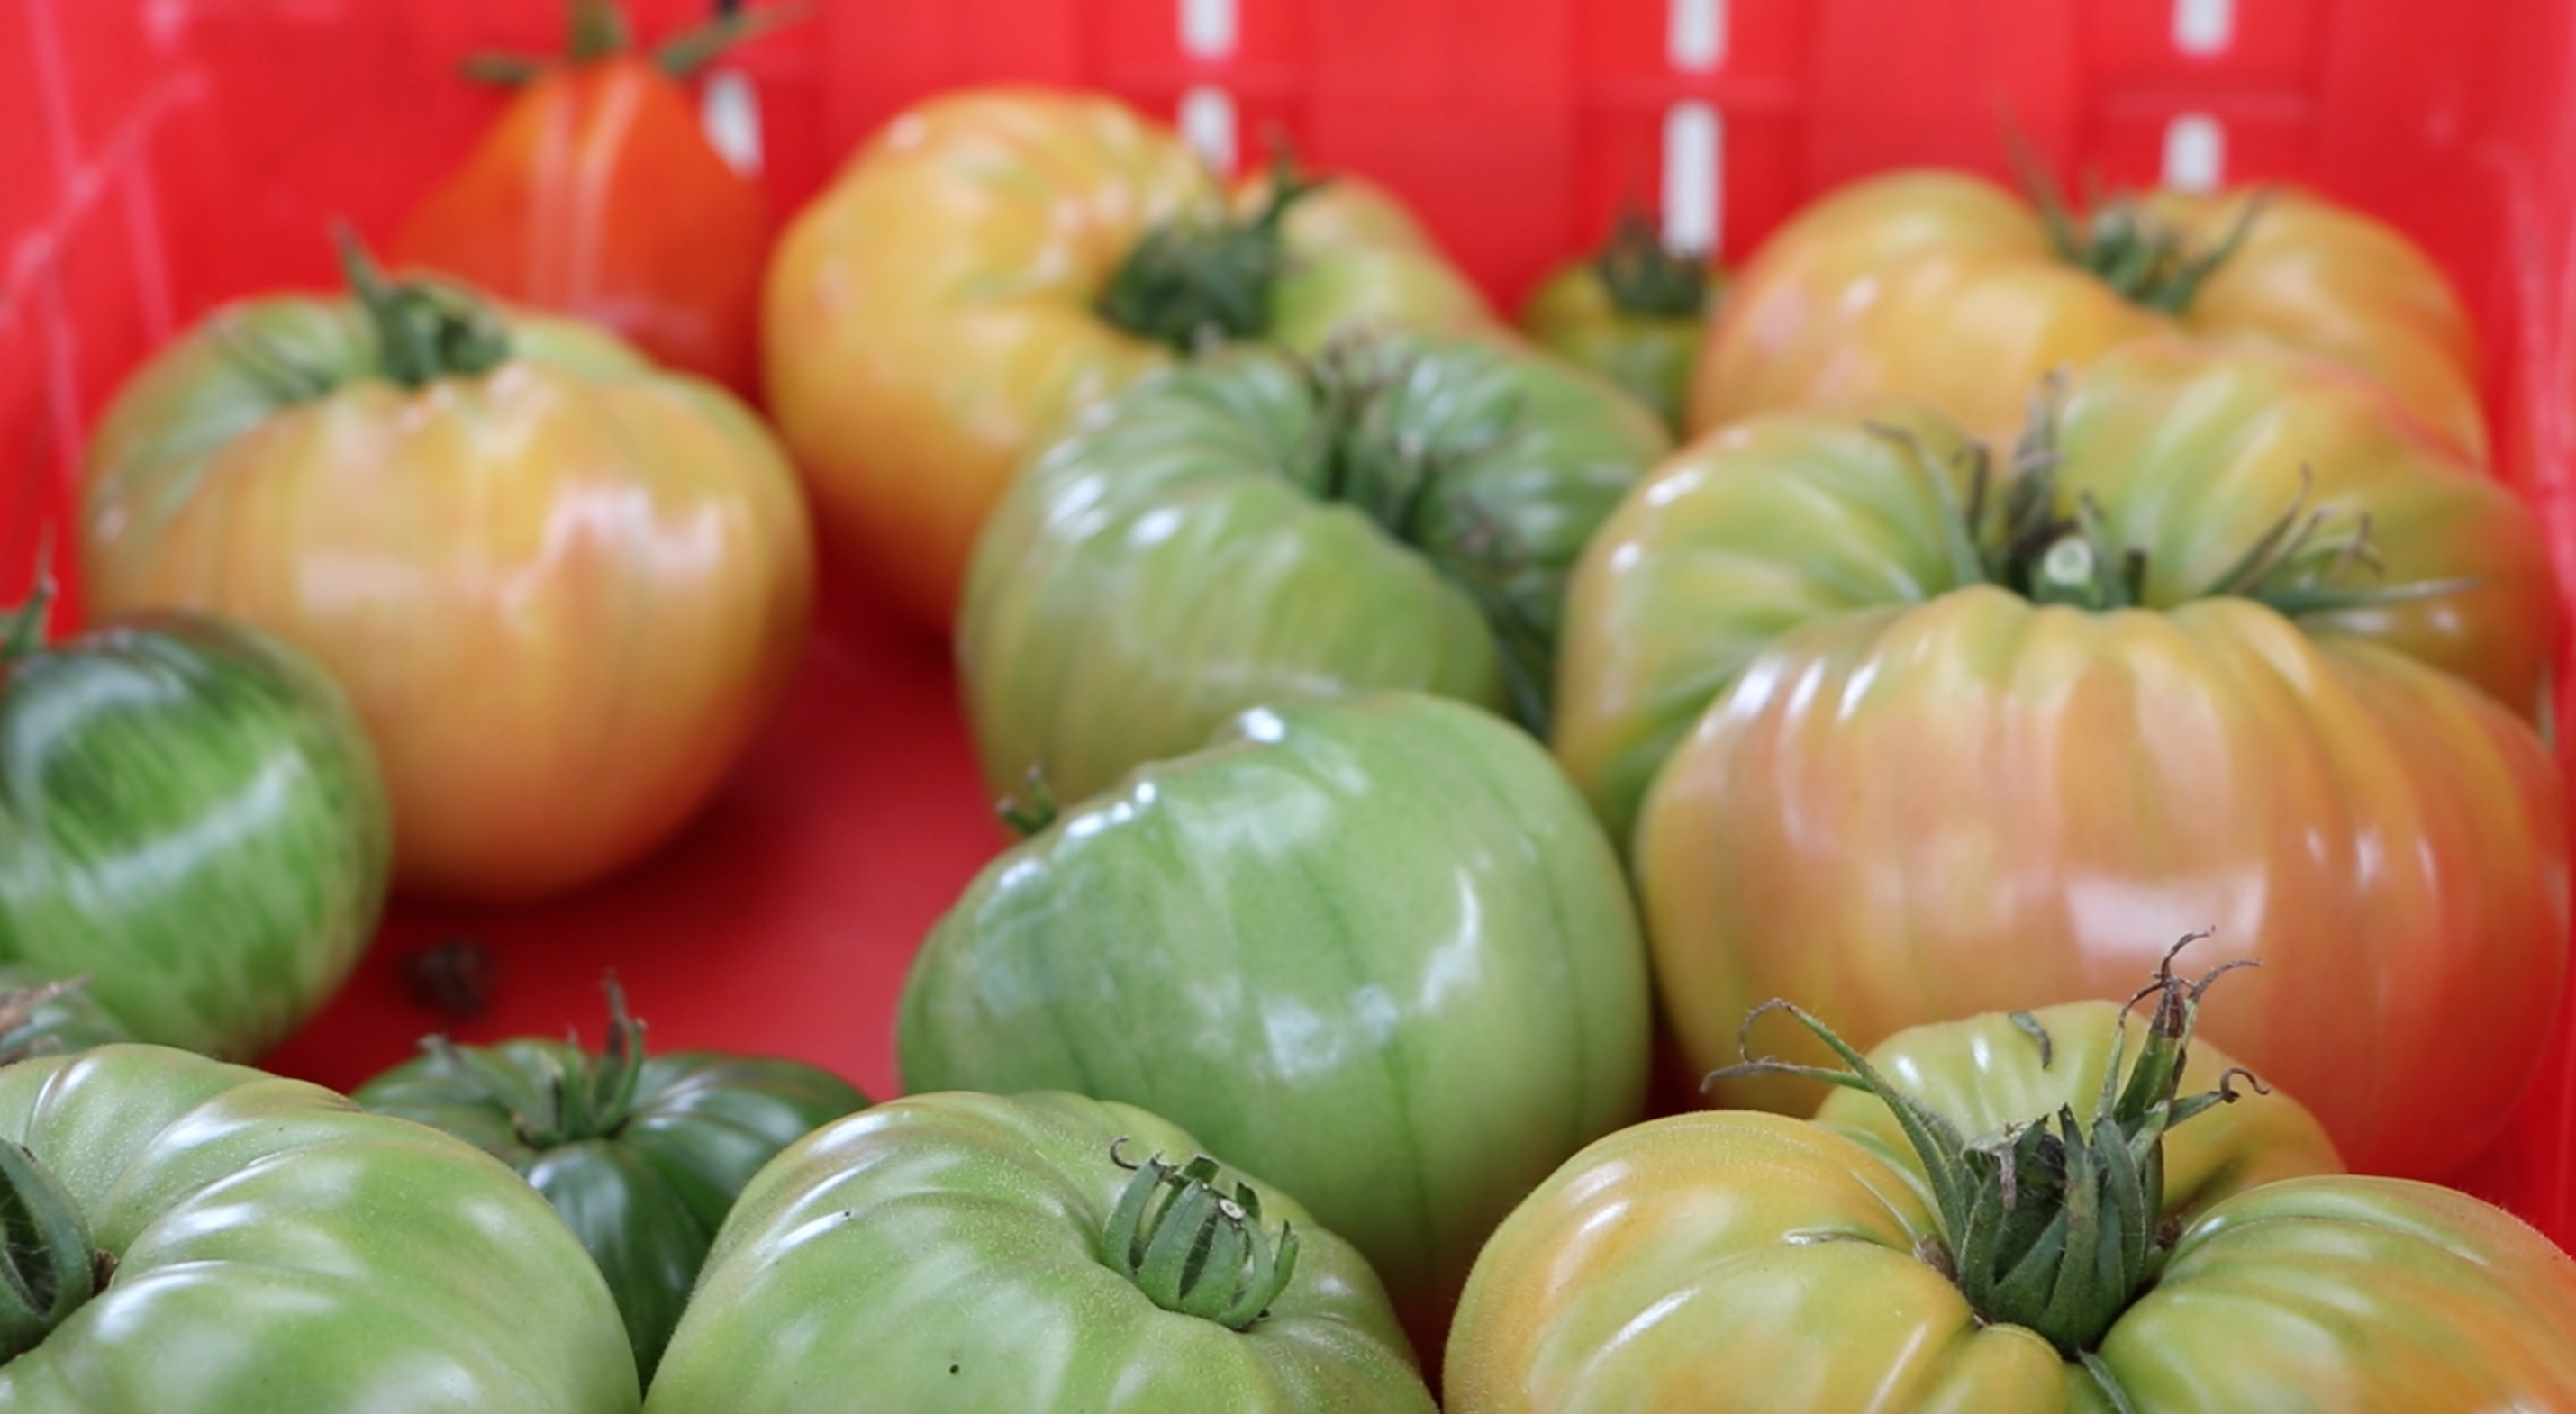 green and red tomatoes in a red bin